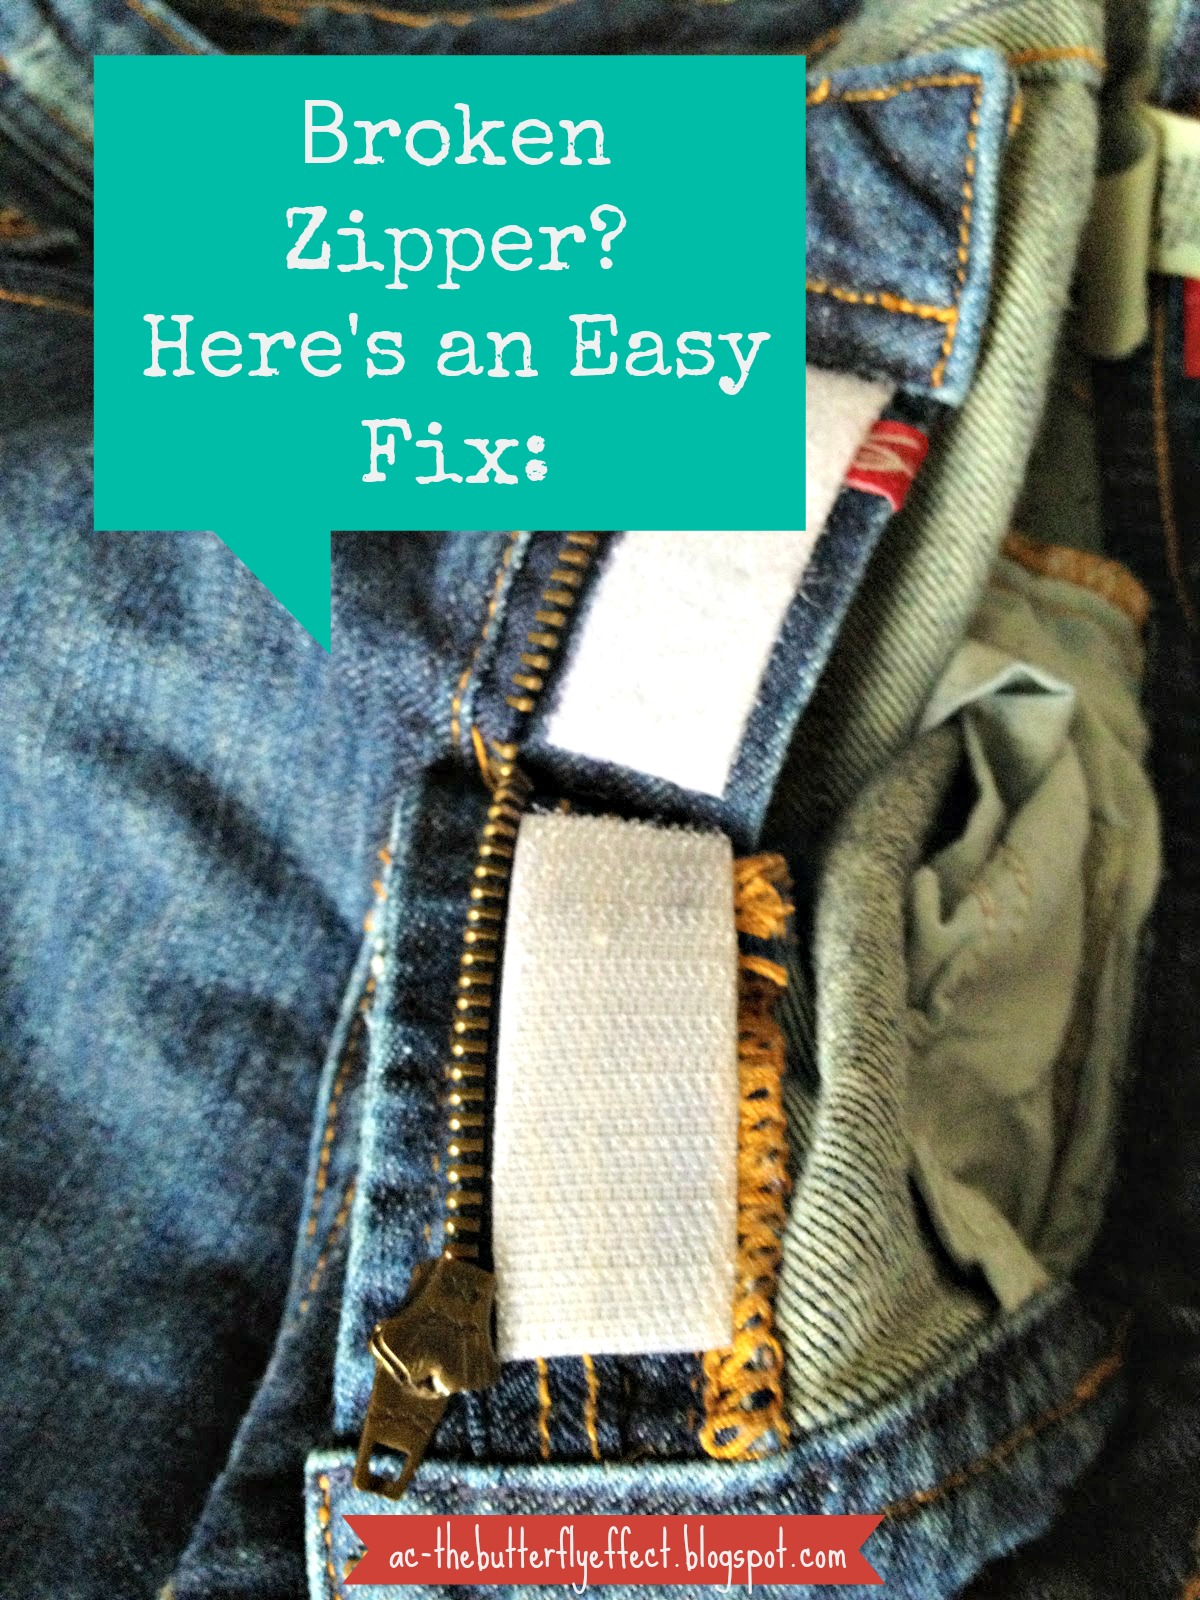 How To Fix A Broken Zipper On A Pair Of Jeans